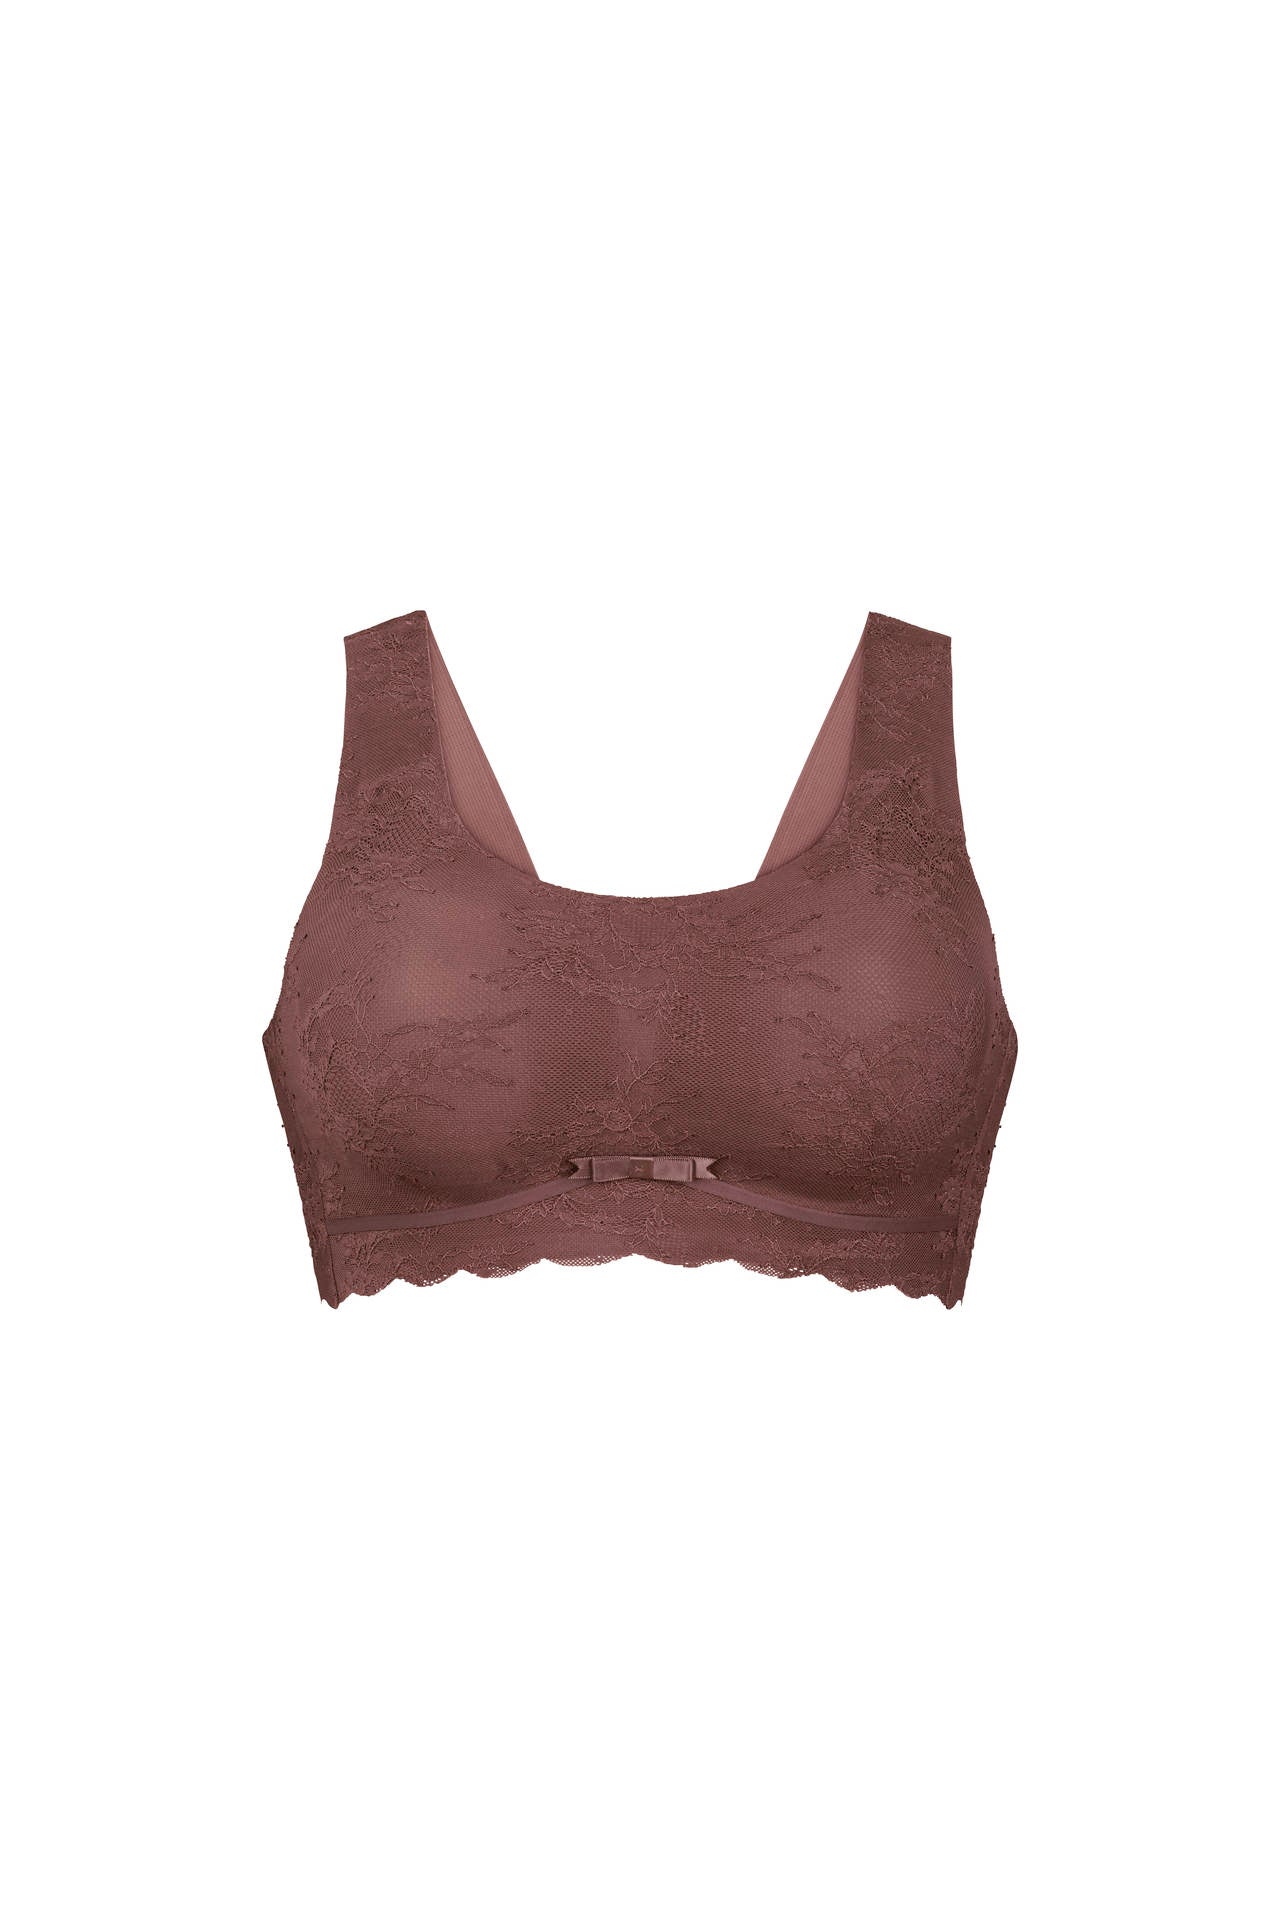 Essentials Lace Bralette - Pinned Up Bra Lounge